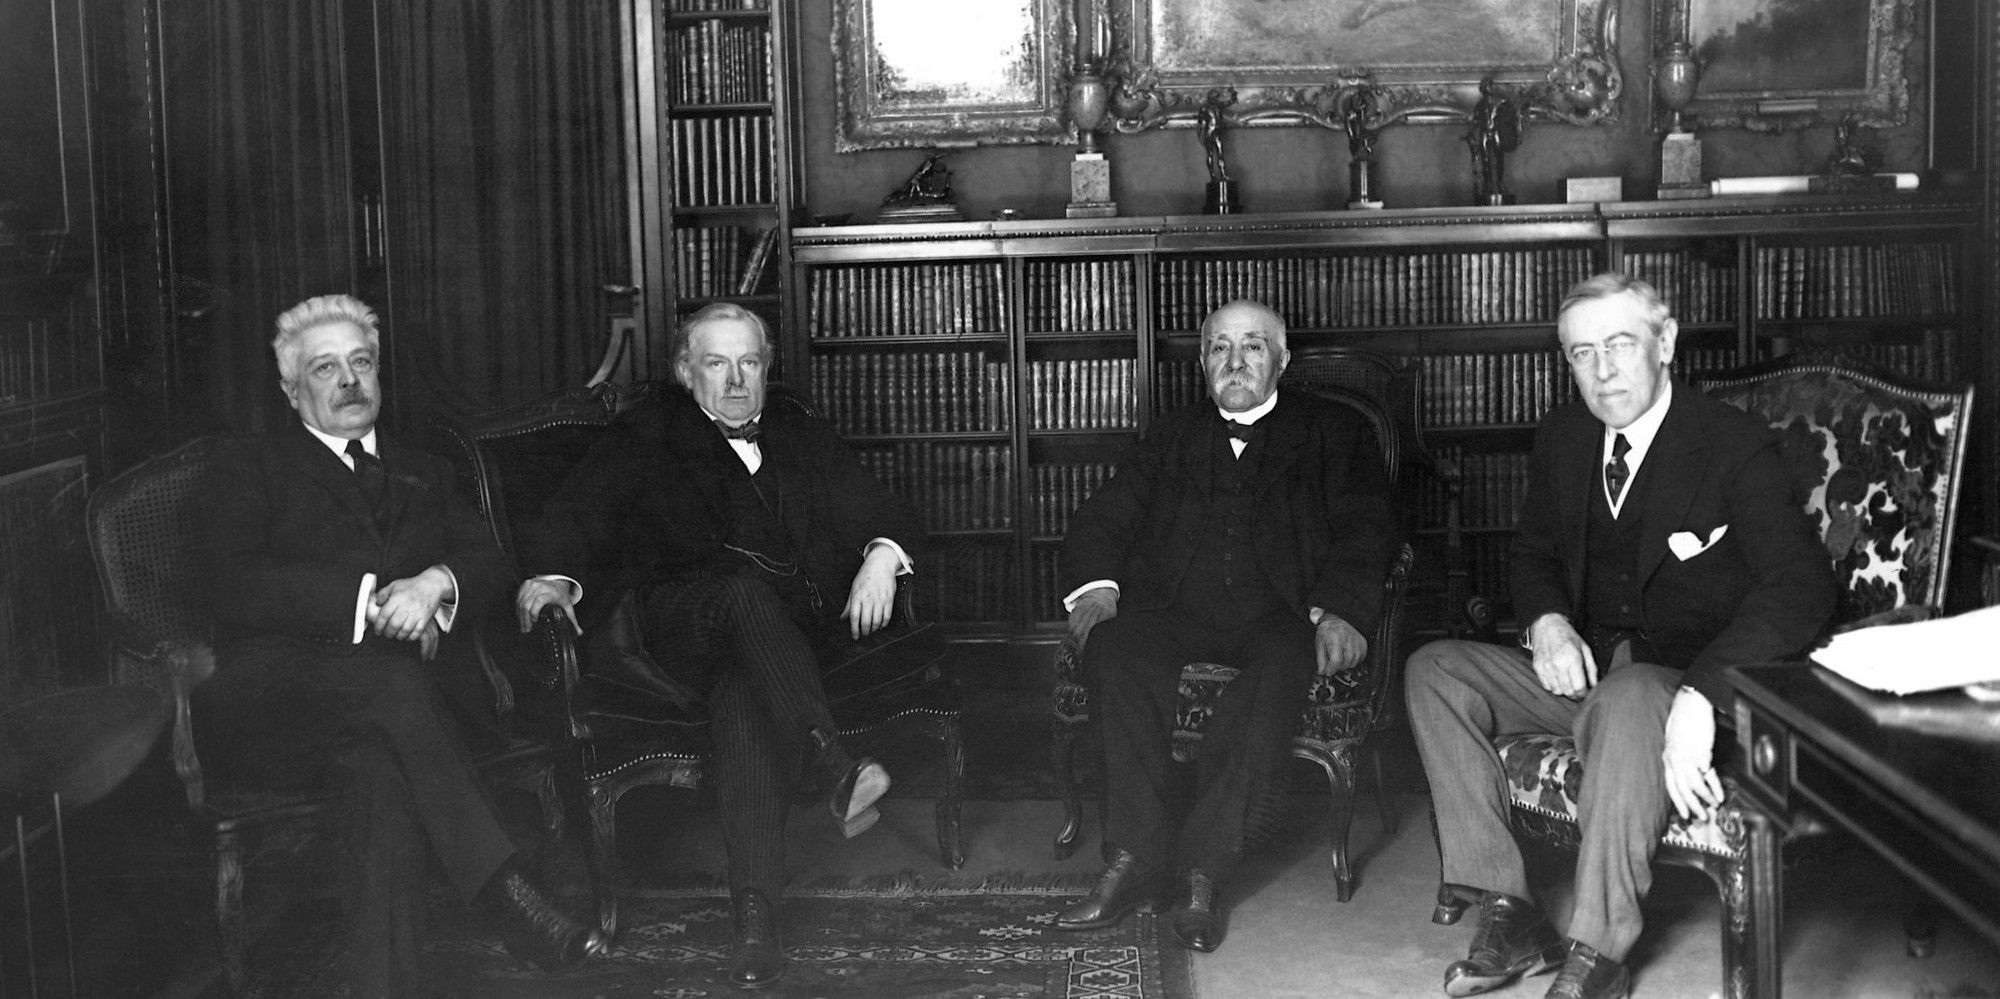 Vittorio Orlando, David Lloyd George, Georges Clemenceau, and Woodrow Wilson meet to discuss the Treaty of Versailles